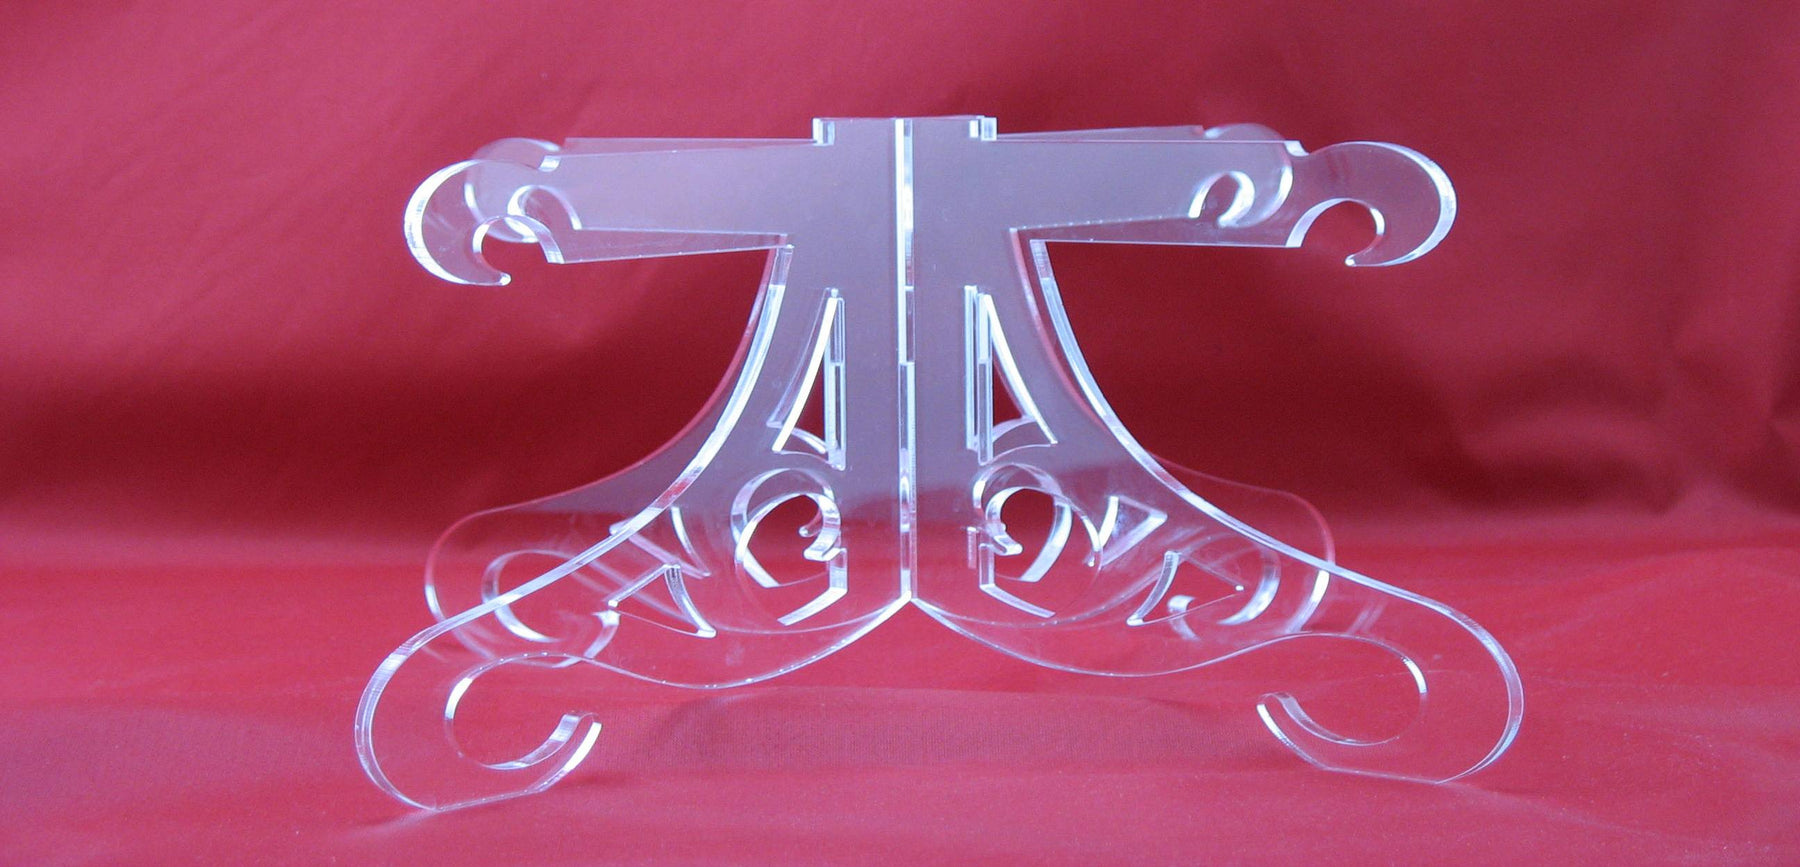 Cake Cupcake Stand Round Clear Acrylic